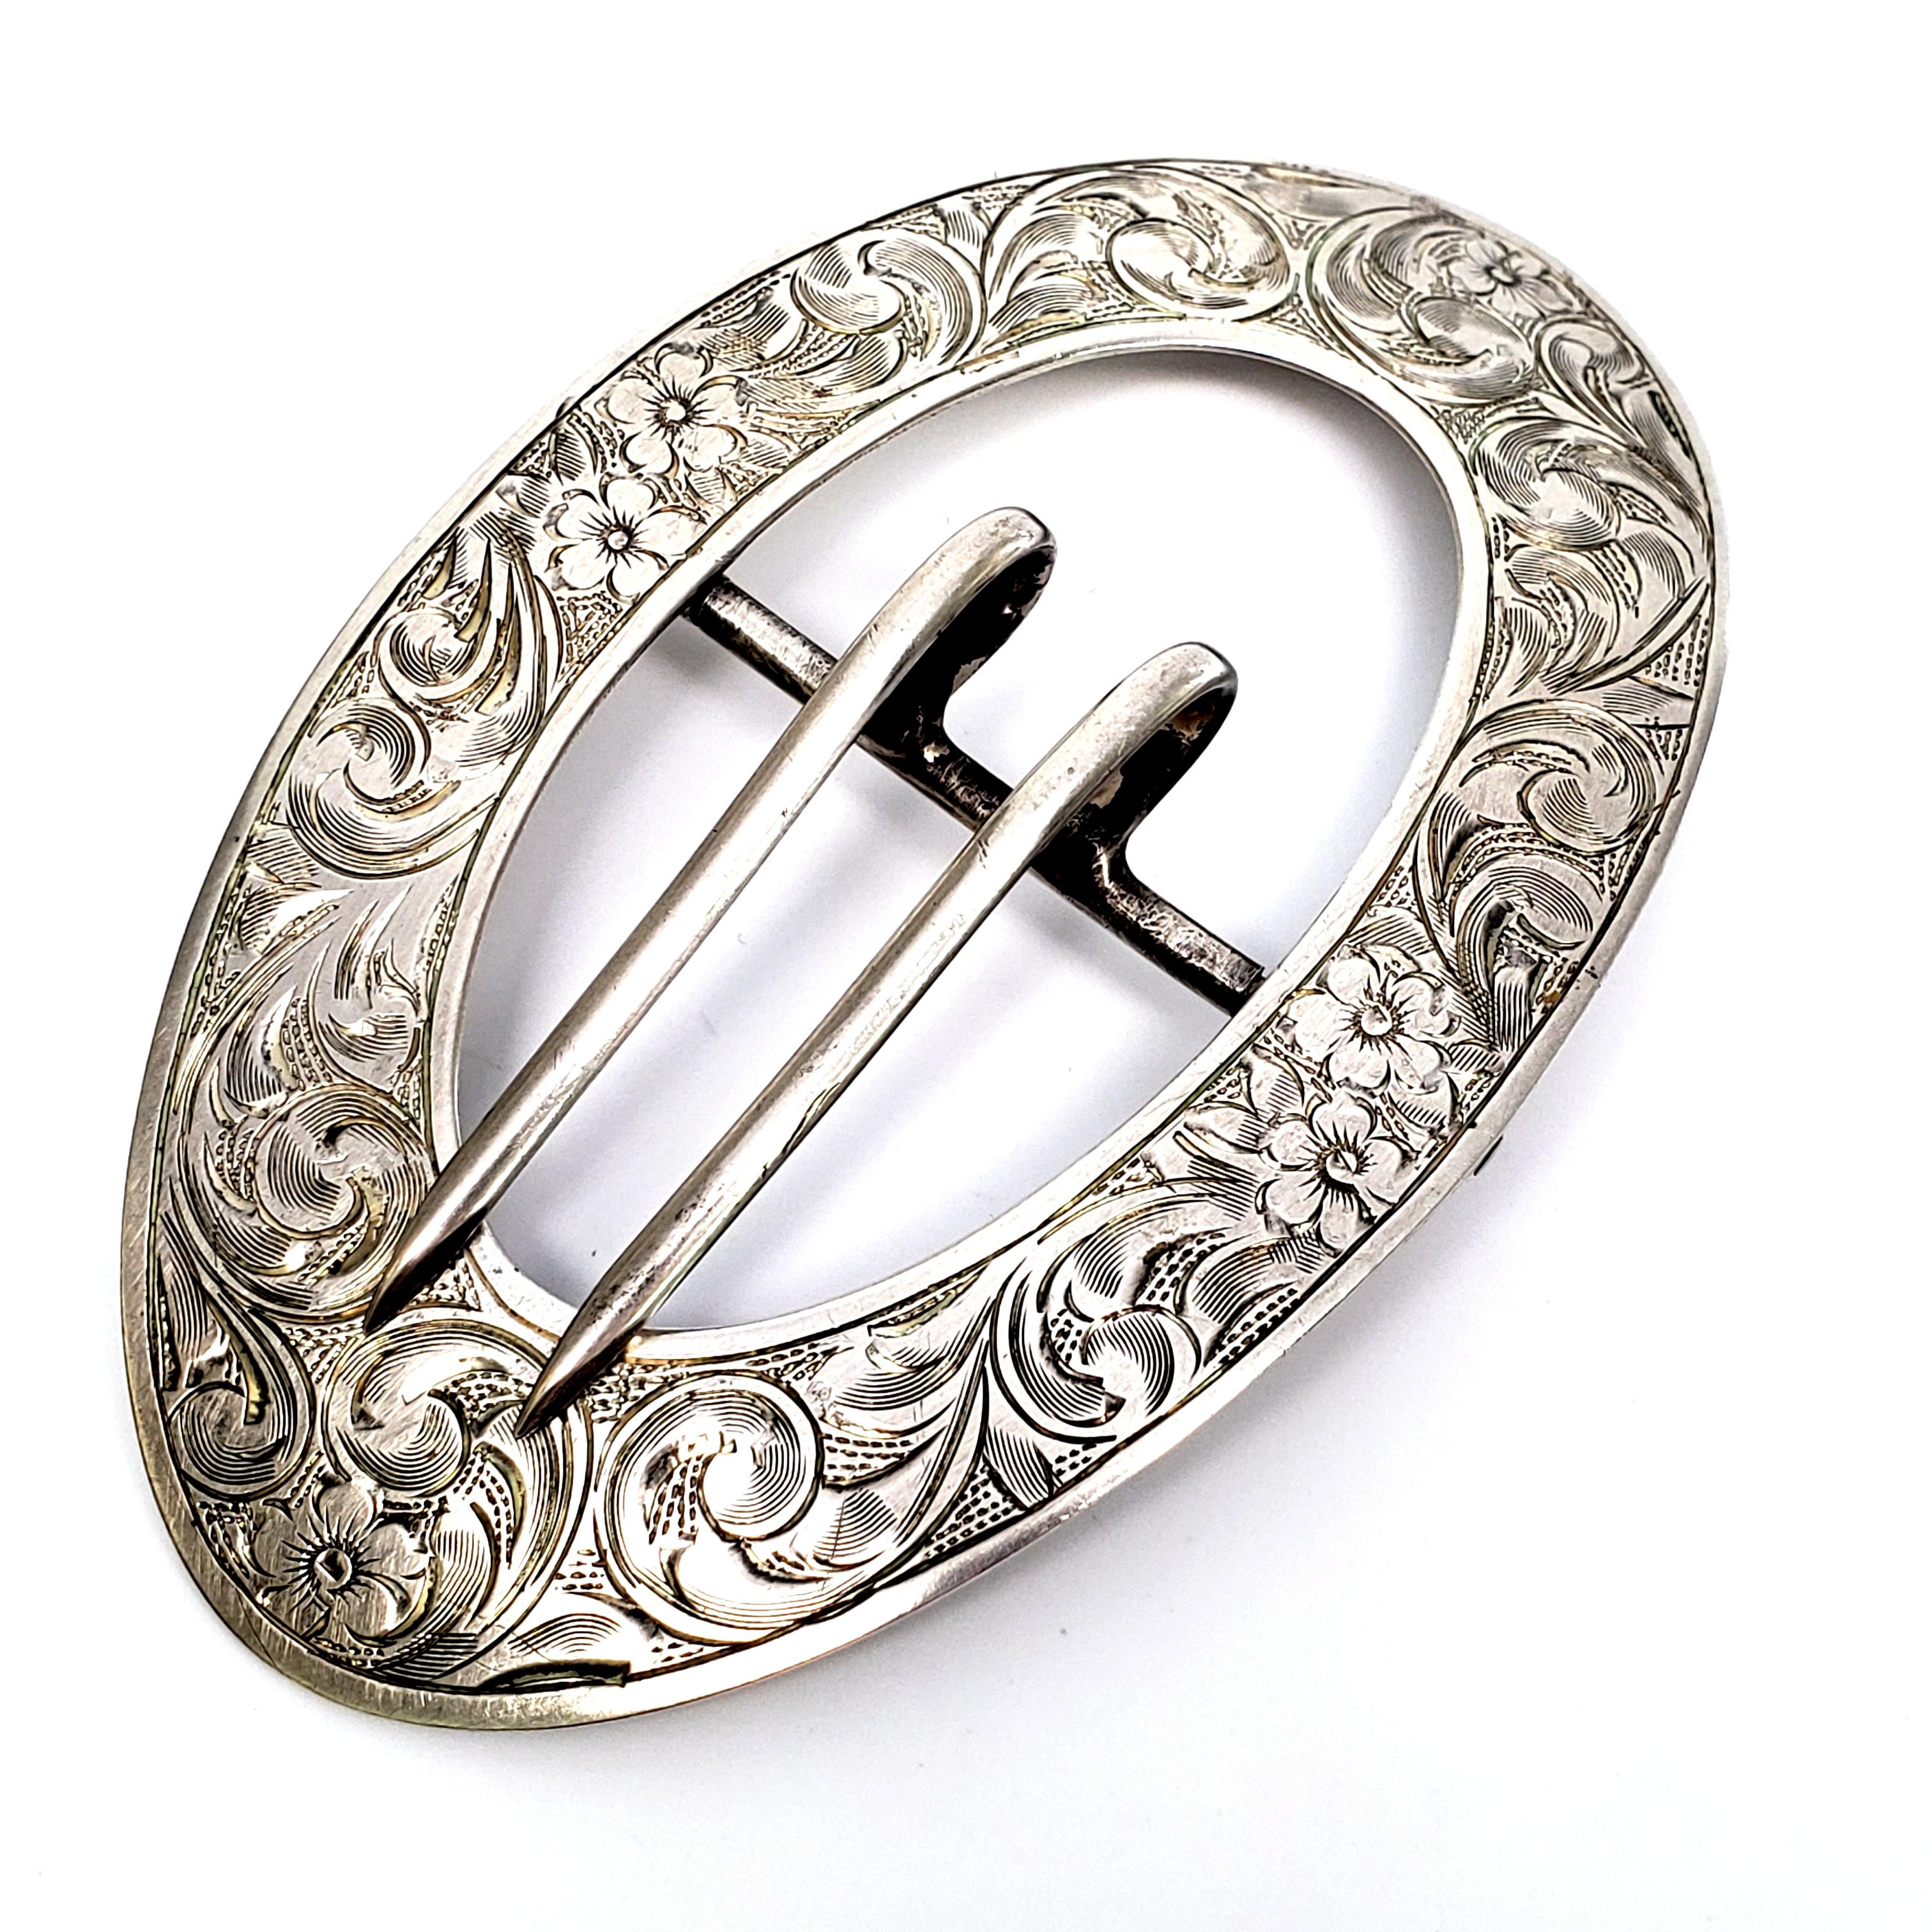 Vintage large, oval sterling silver belt buckle.

Beautiful chased and respousse design with floral and scroll patterns.

Measures 3 15/16